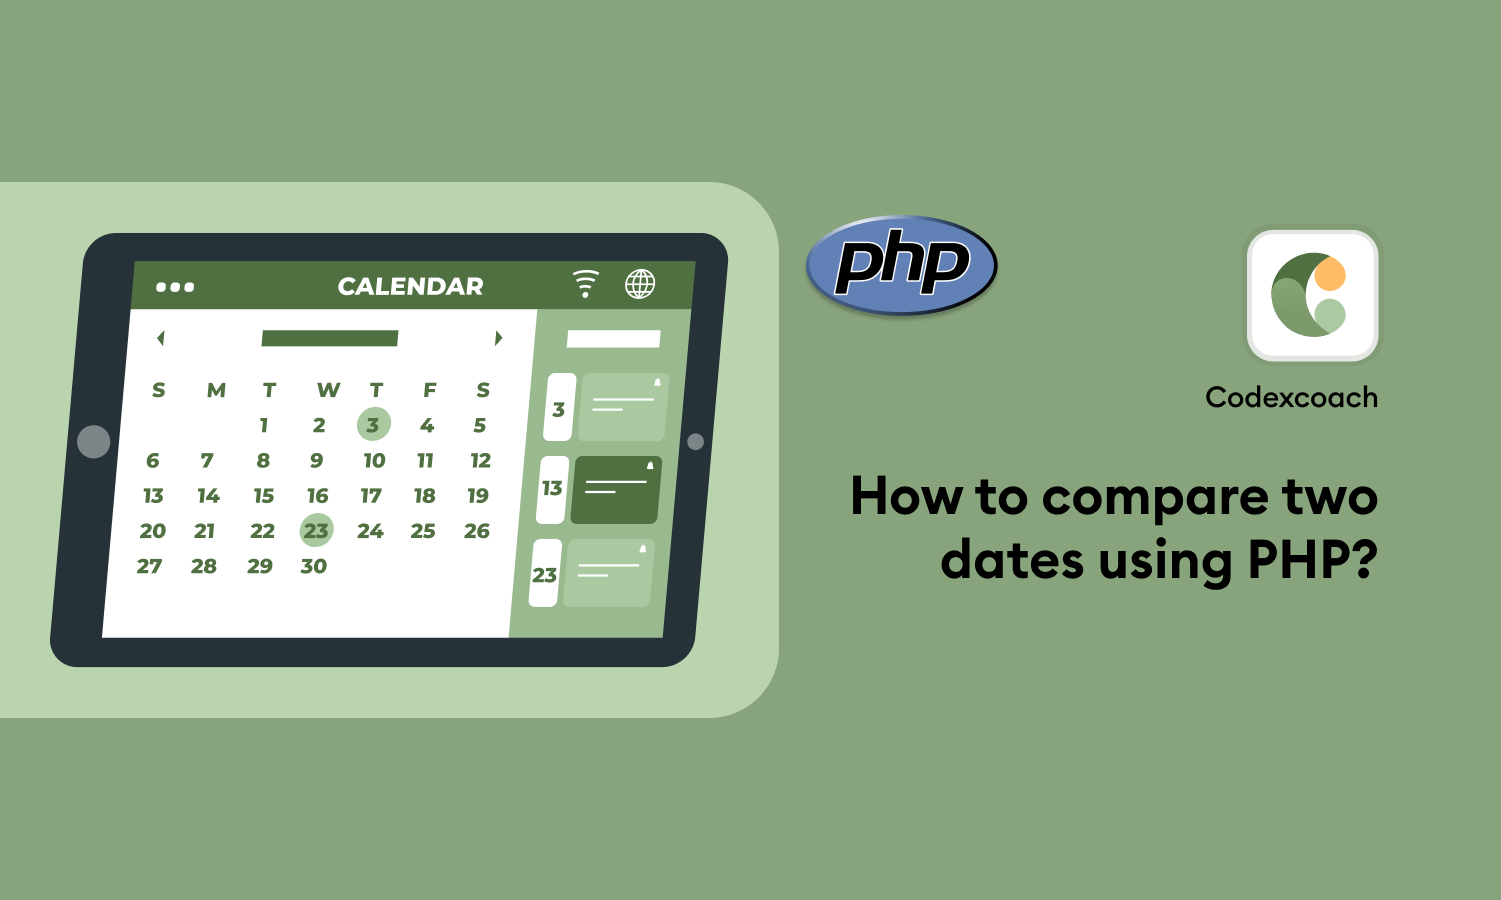 How to compare two dates using PHP